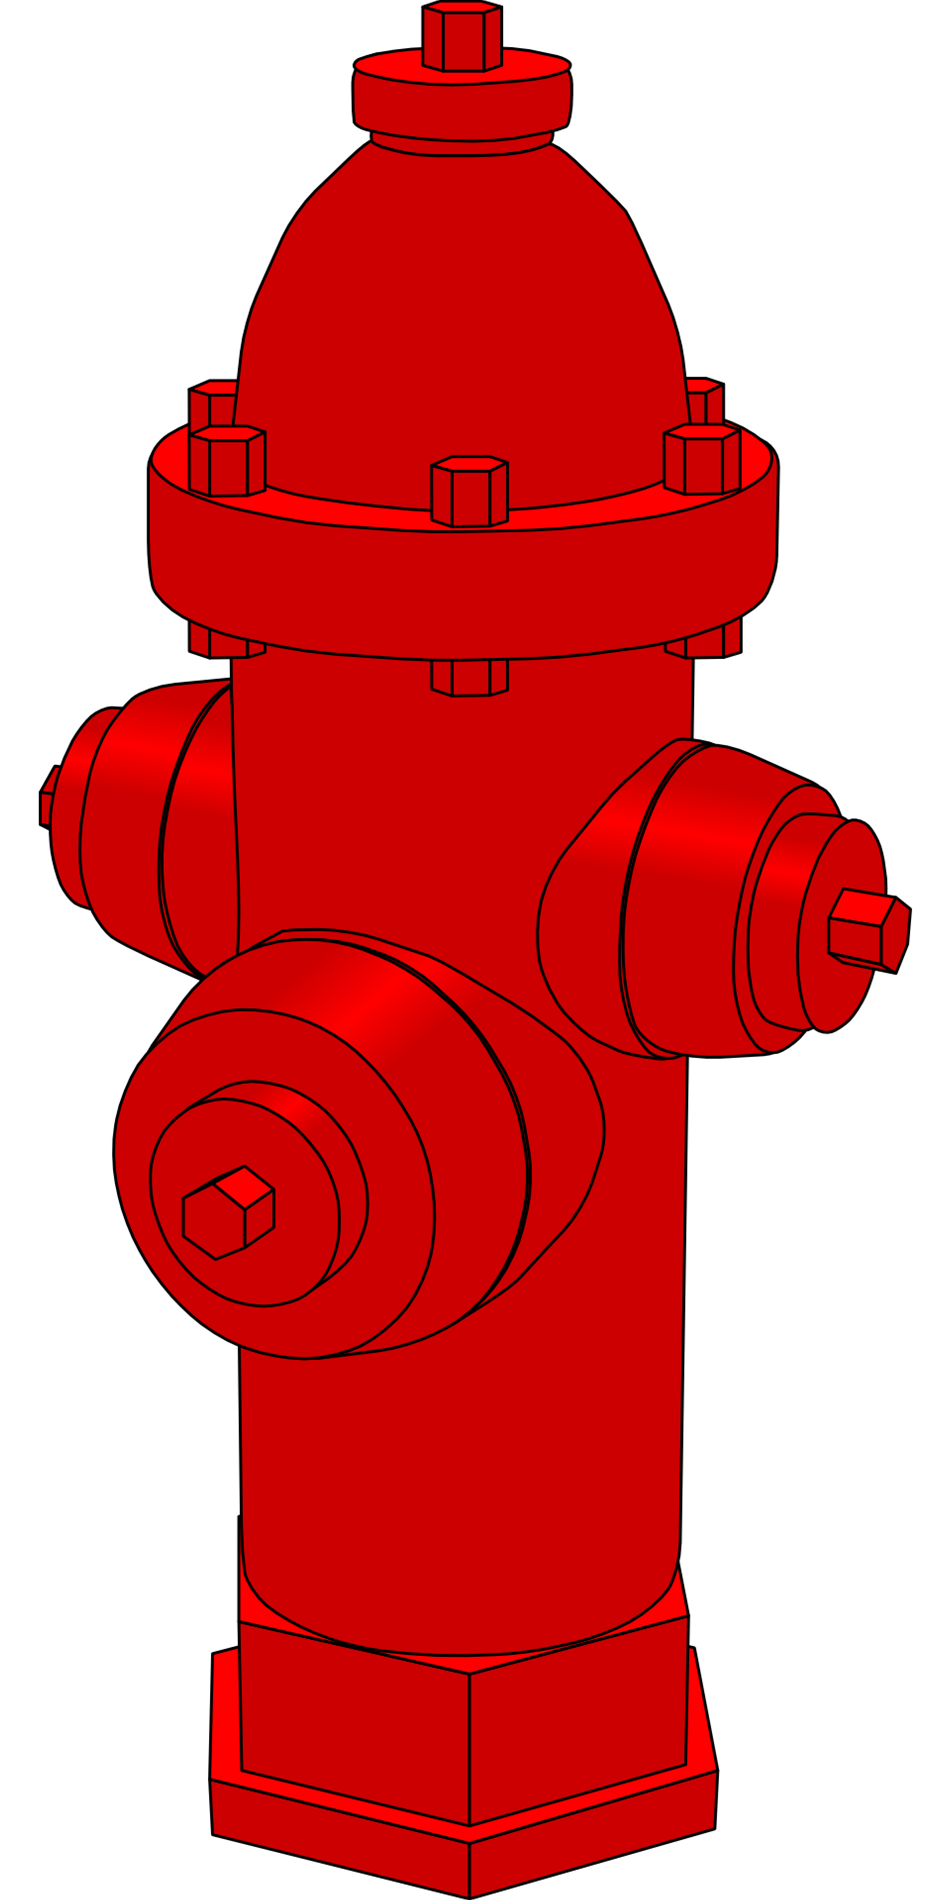 Hydrant drawing.png